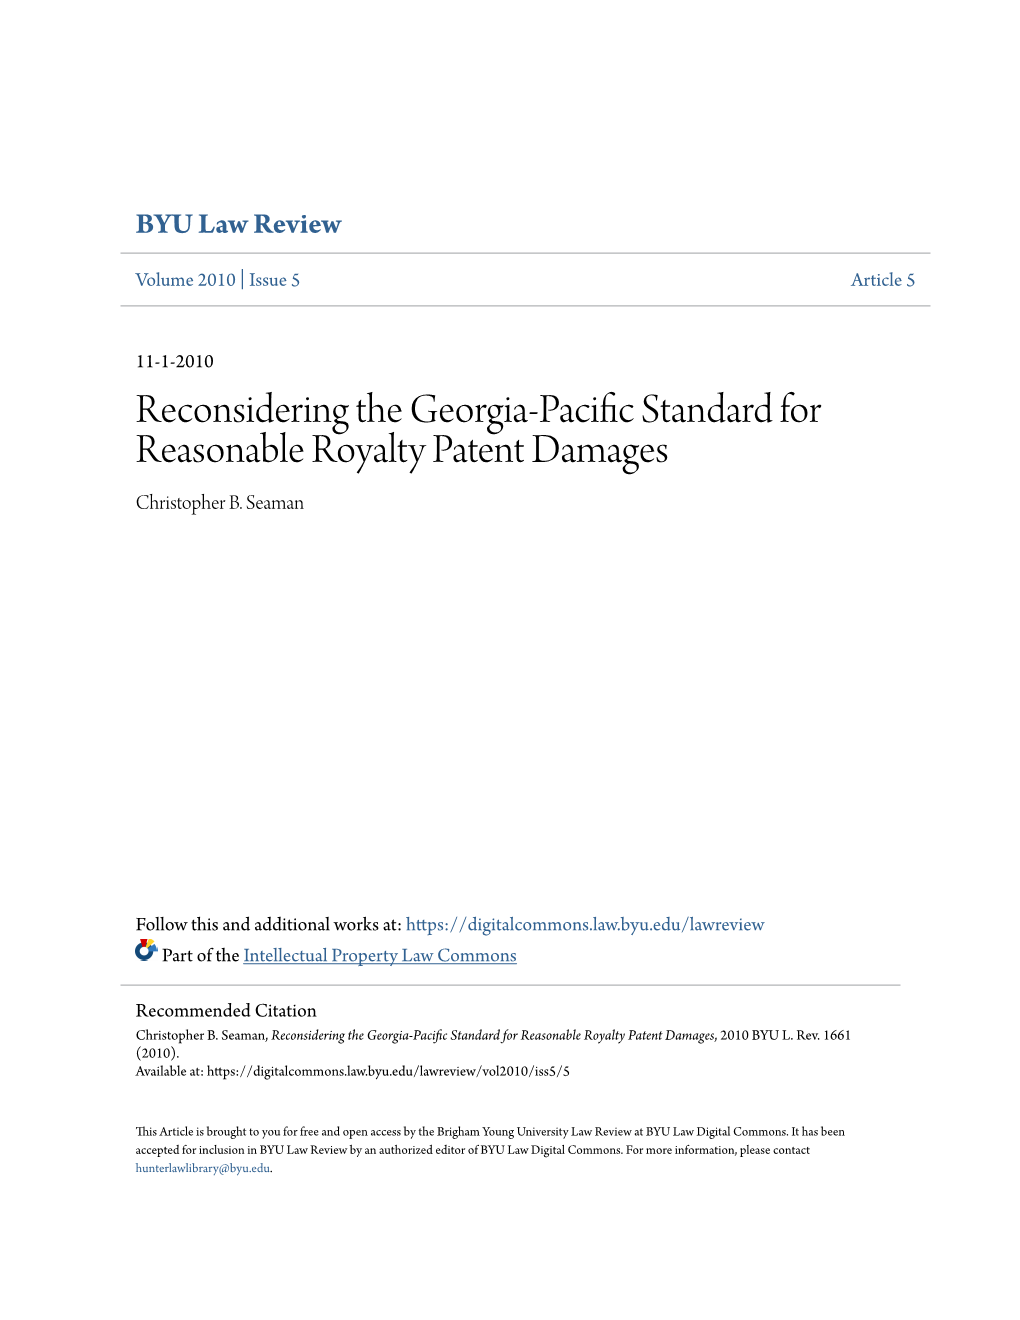 Reconsidering the Georgia-Pacific Standard for Reasonable Royalty Patent Damages